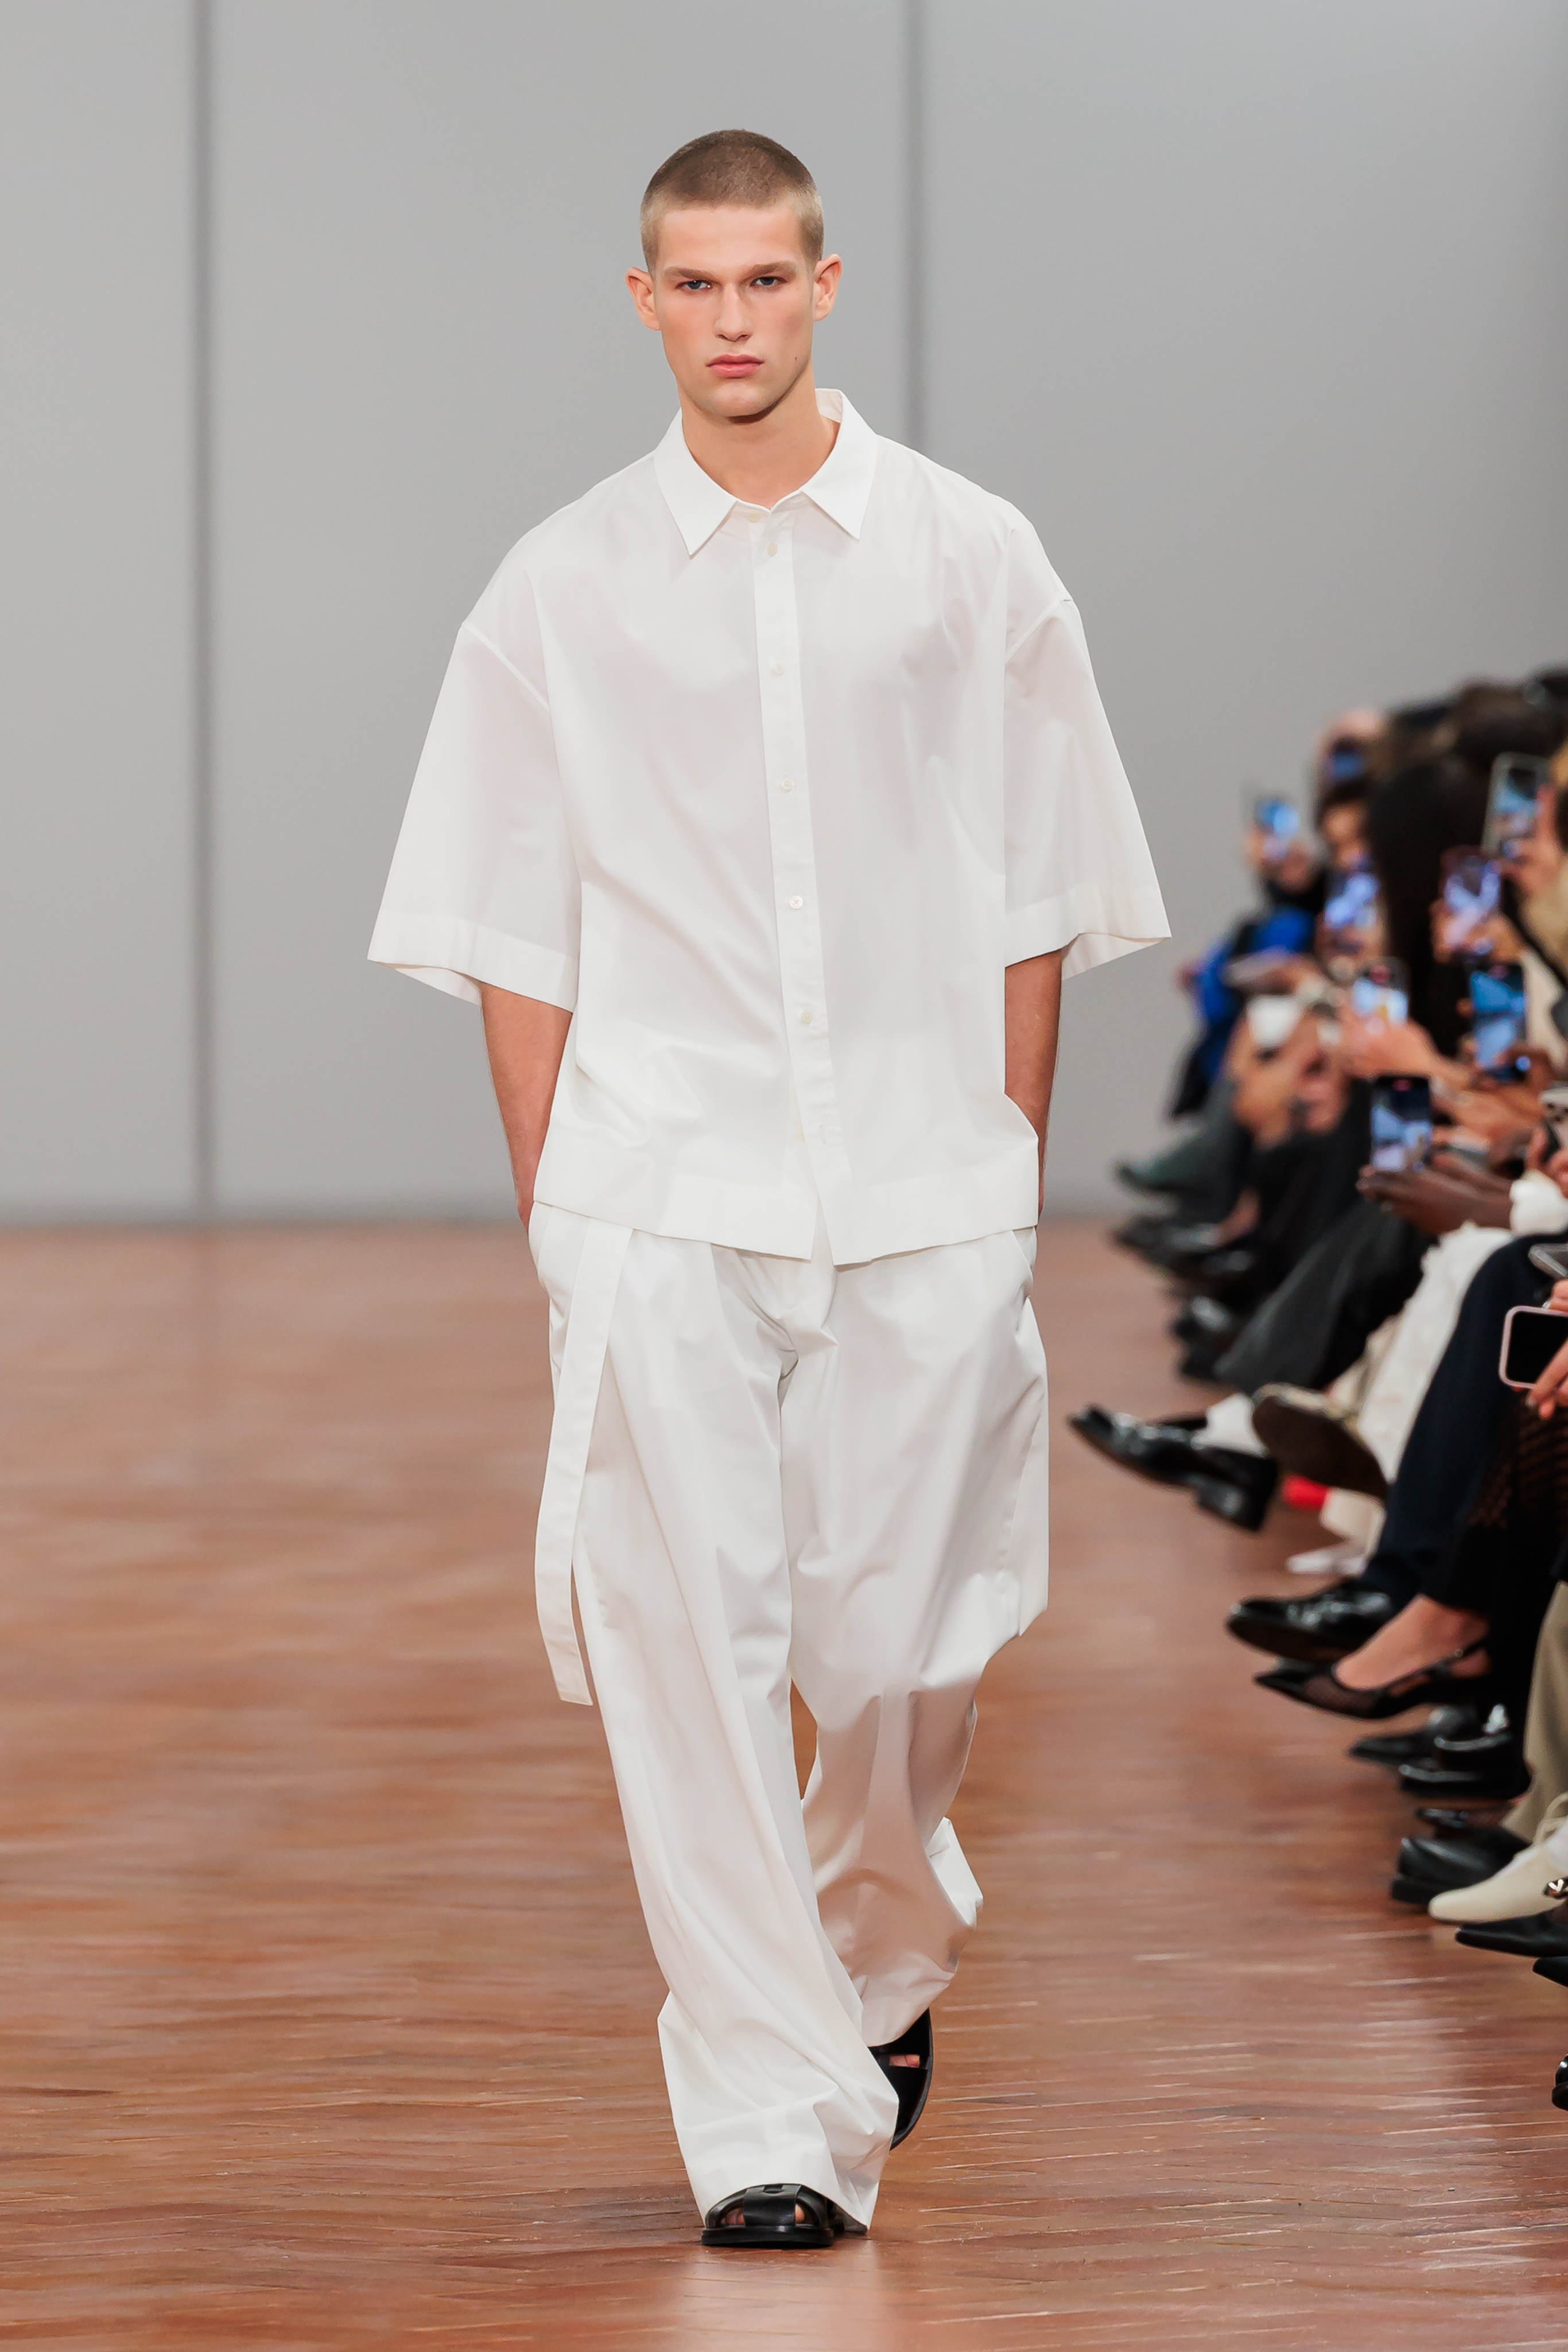 Model in a fashion show wearing an oversized white shirt paired with wide-leg pants and black shoes